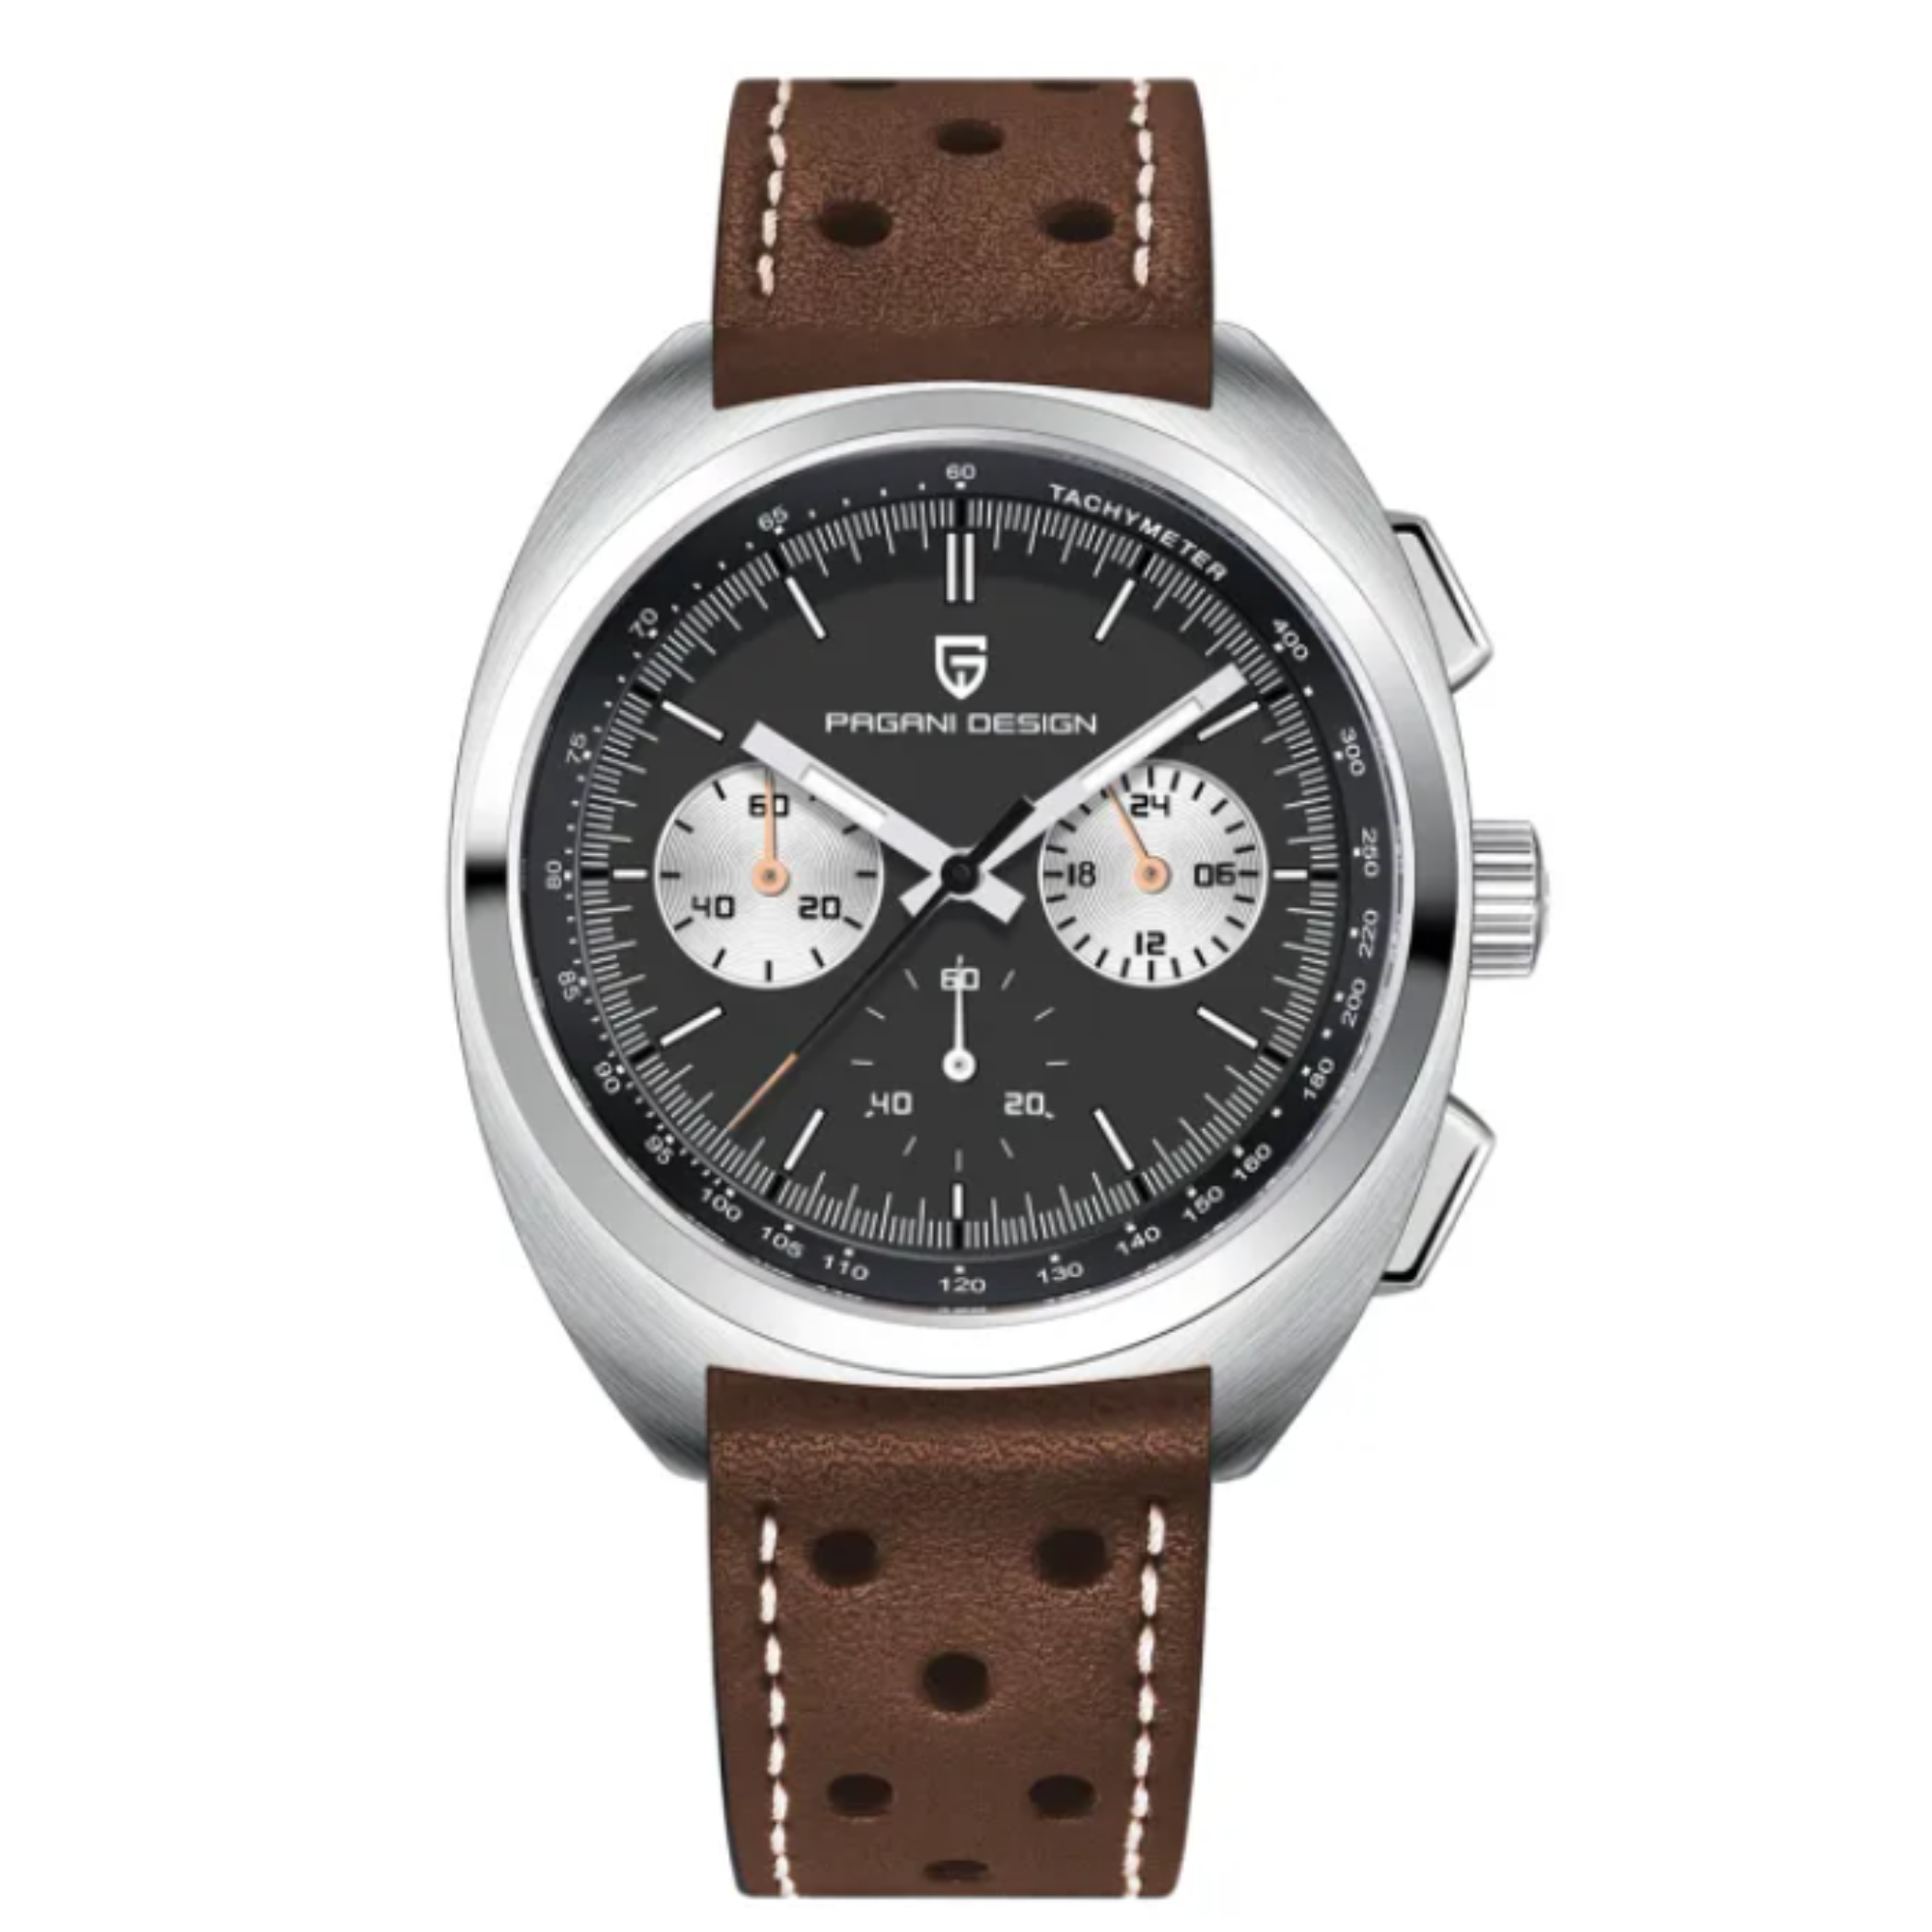 PAGANI DESIGN PD-1782 Men's Quartz Watches Chronograph Stainless Steel 40mm Sports Wrist Watch for Men - Black Dial With Brown Leather Strap